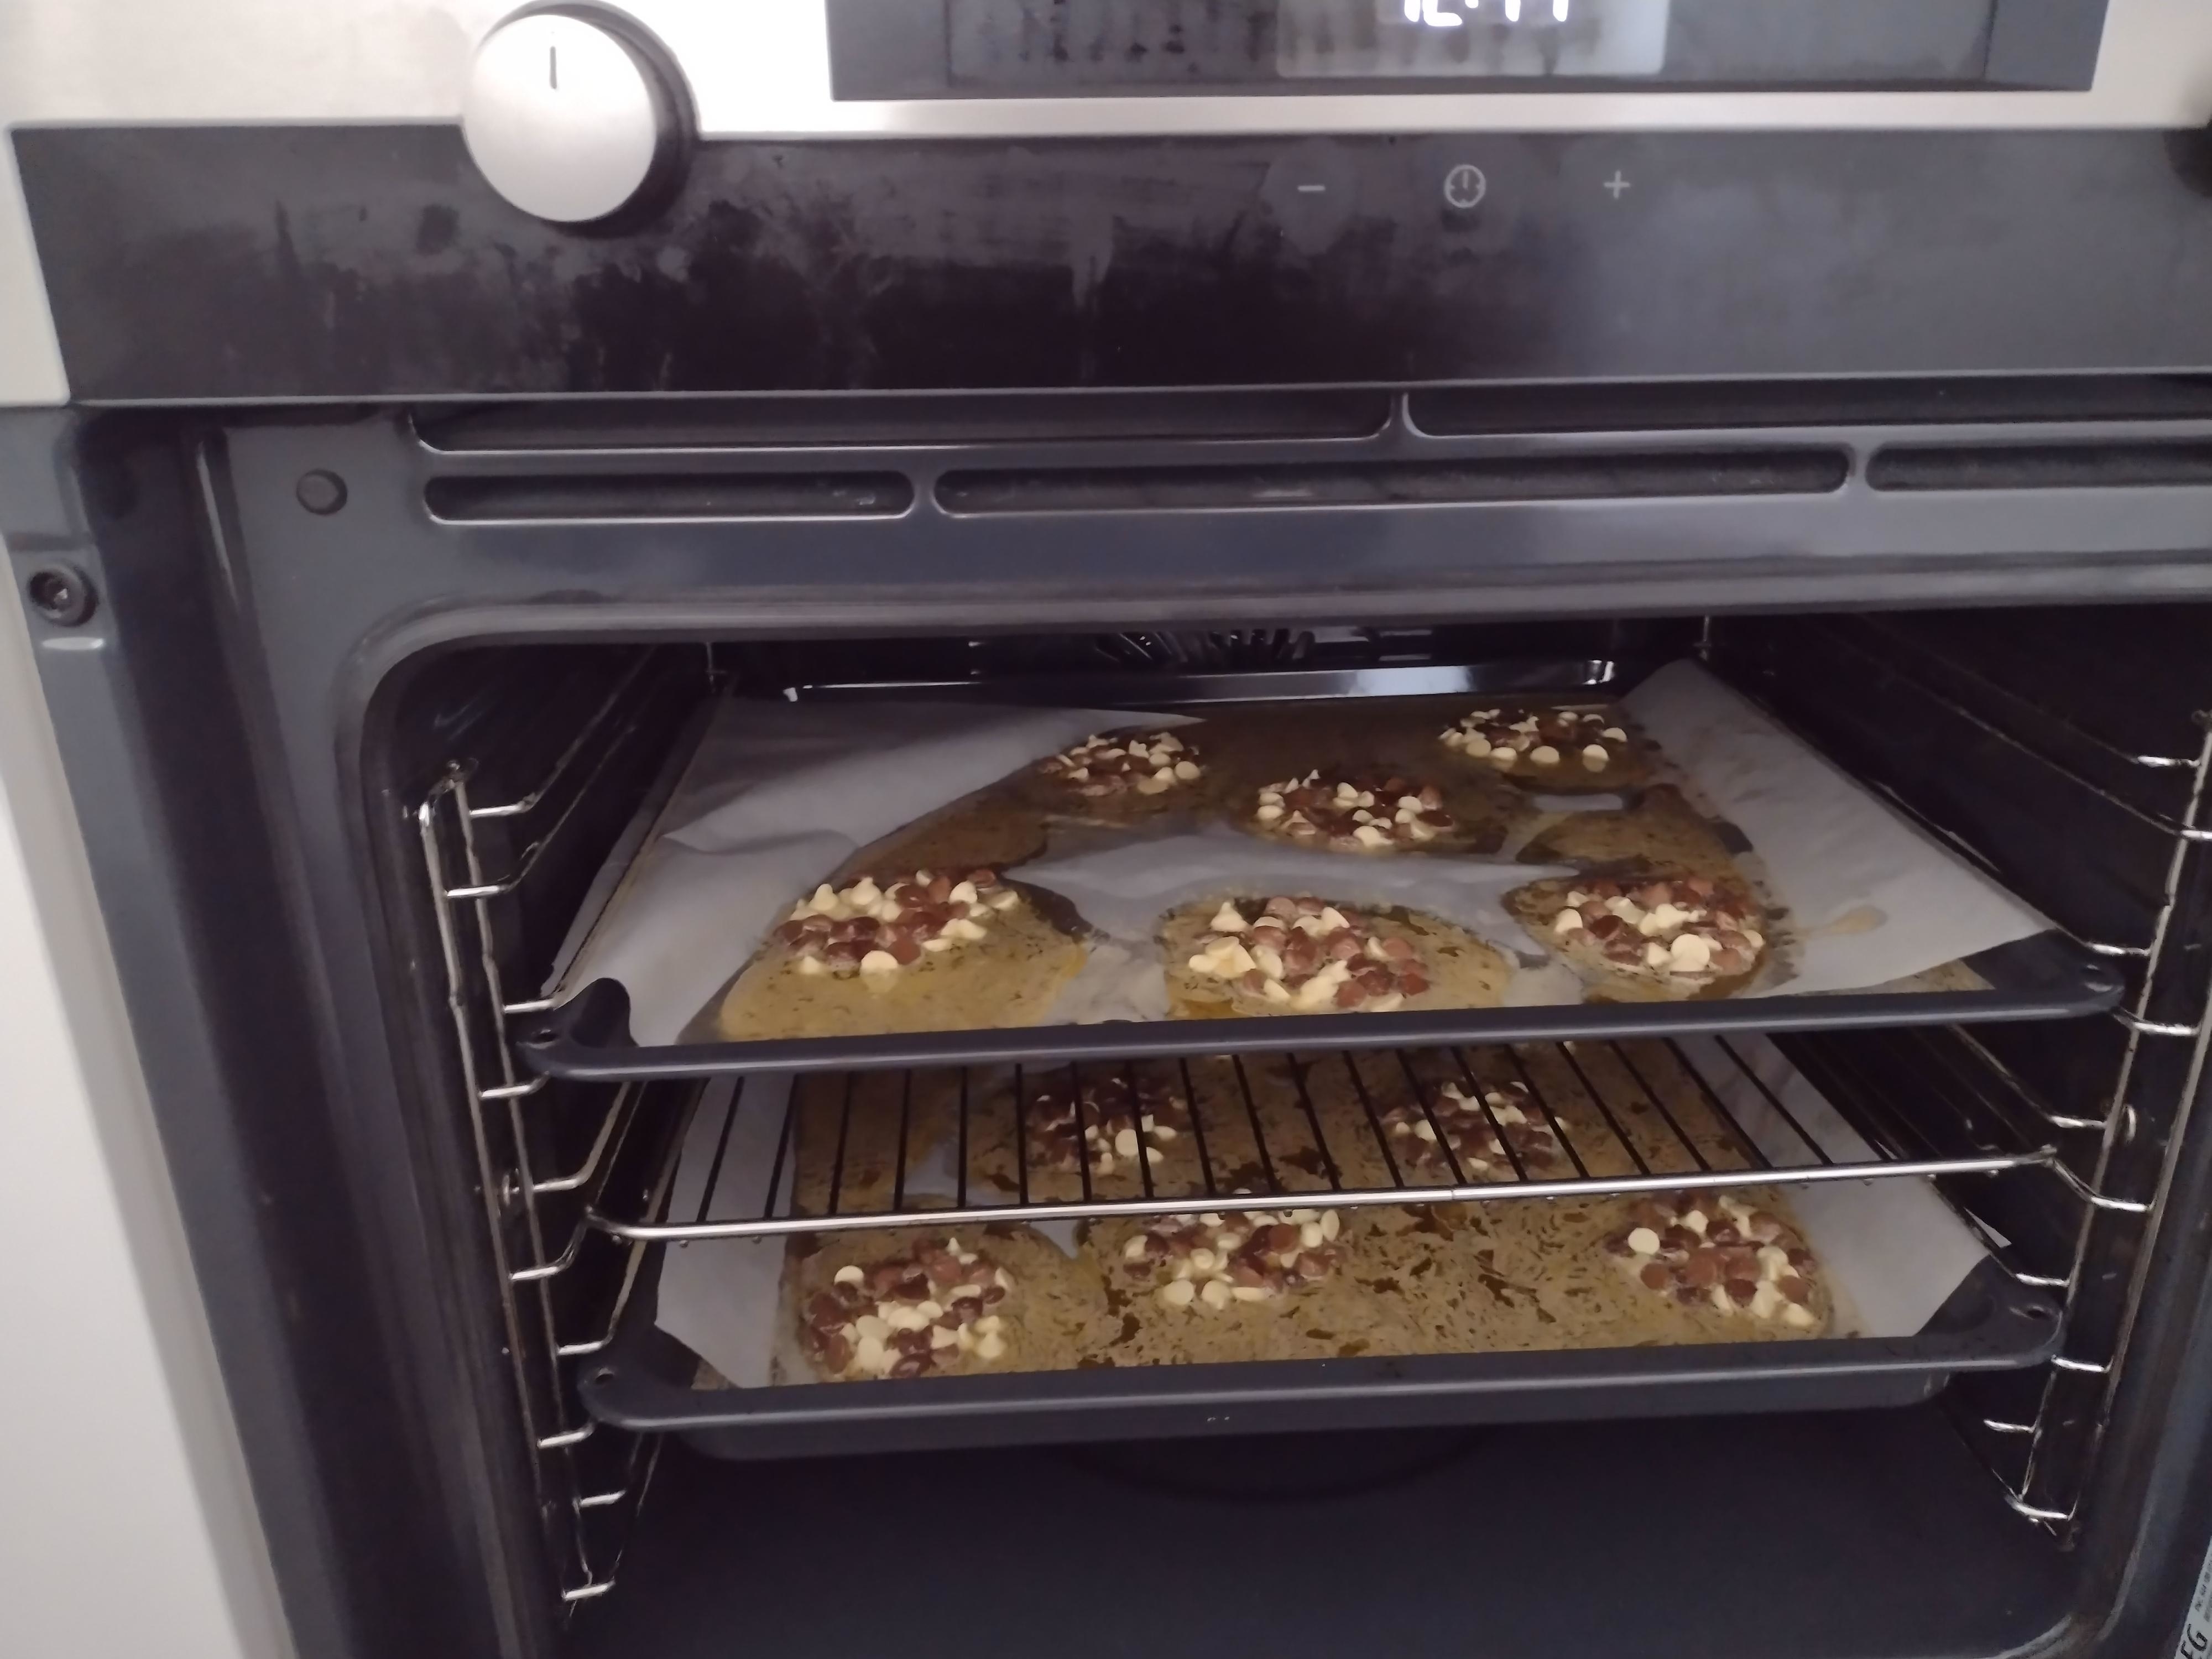 Melted cookies on trays in an oven